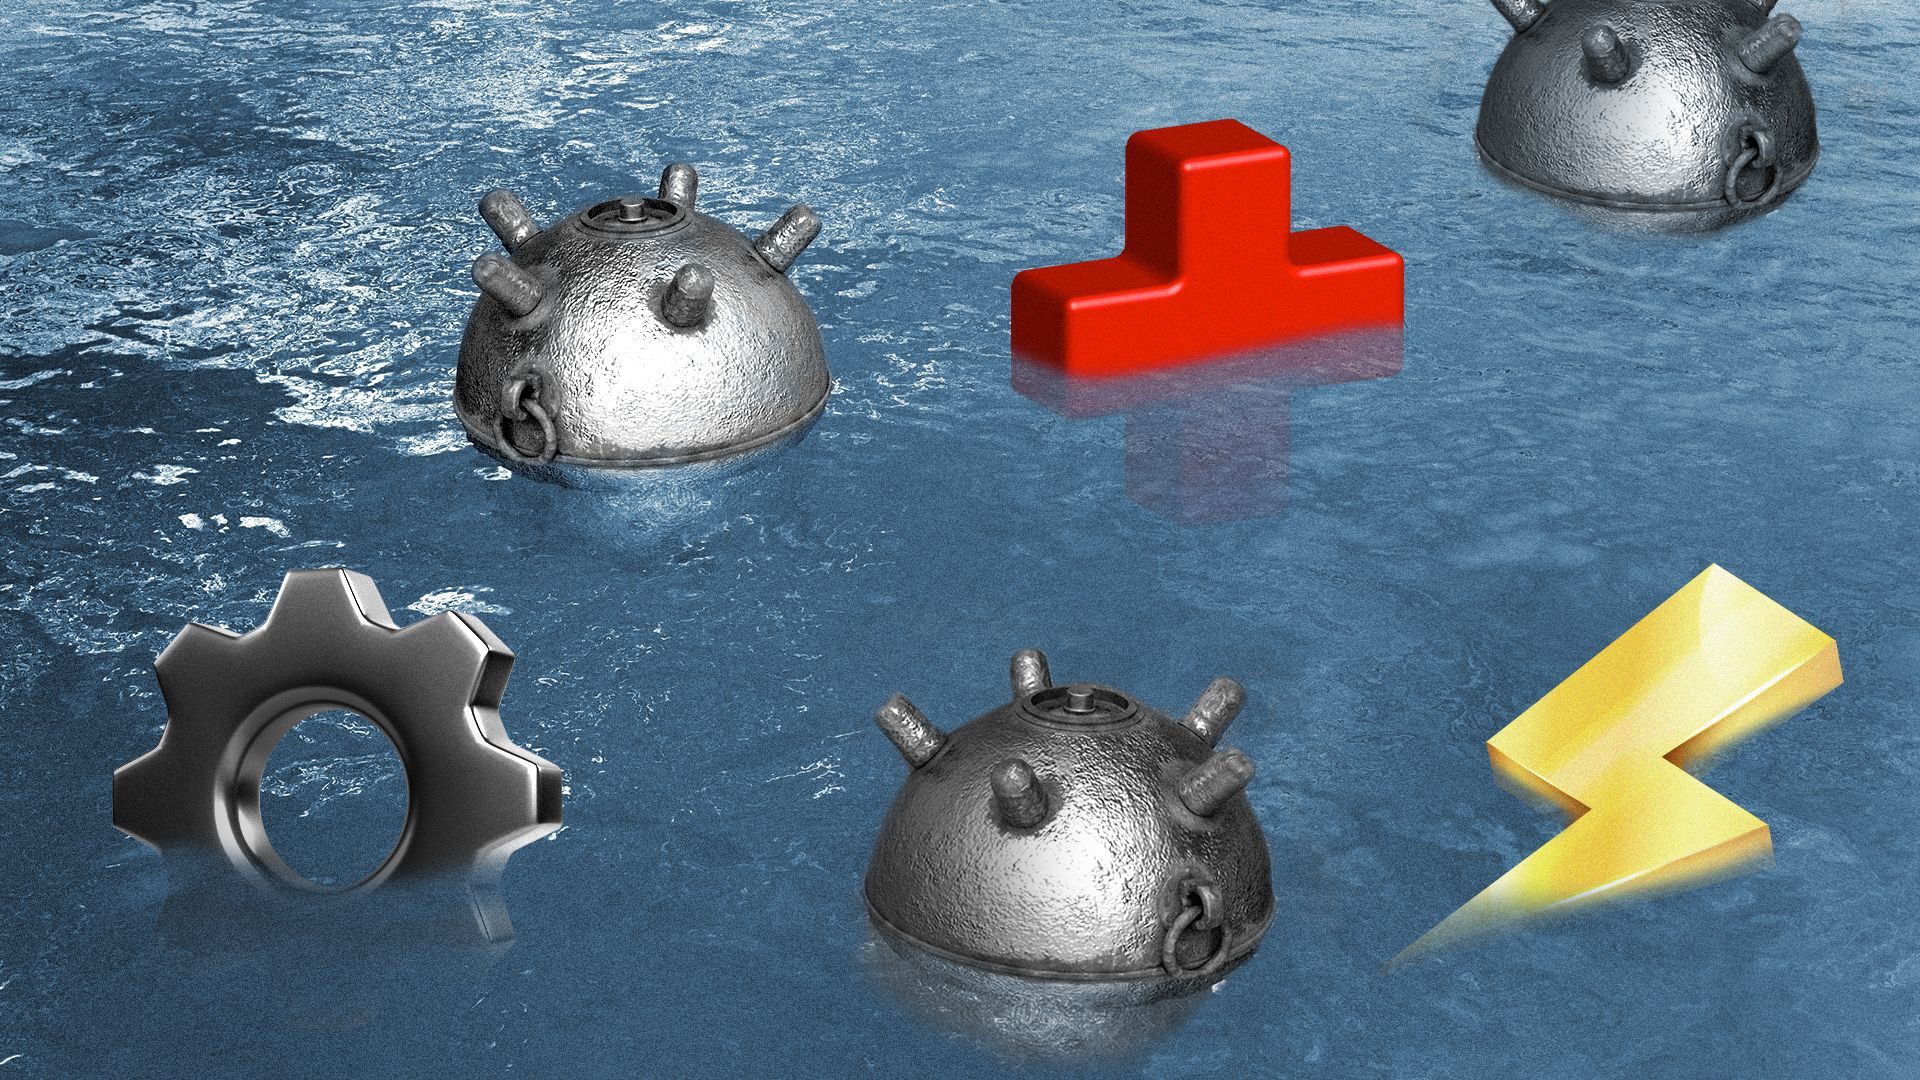 Illustration of a gear, red cross, and lightning bolt floating in water with naval mines.